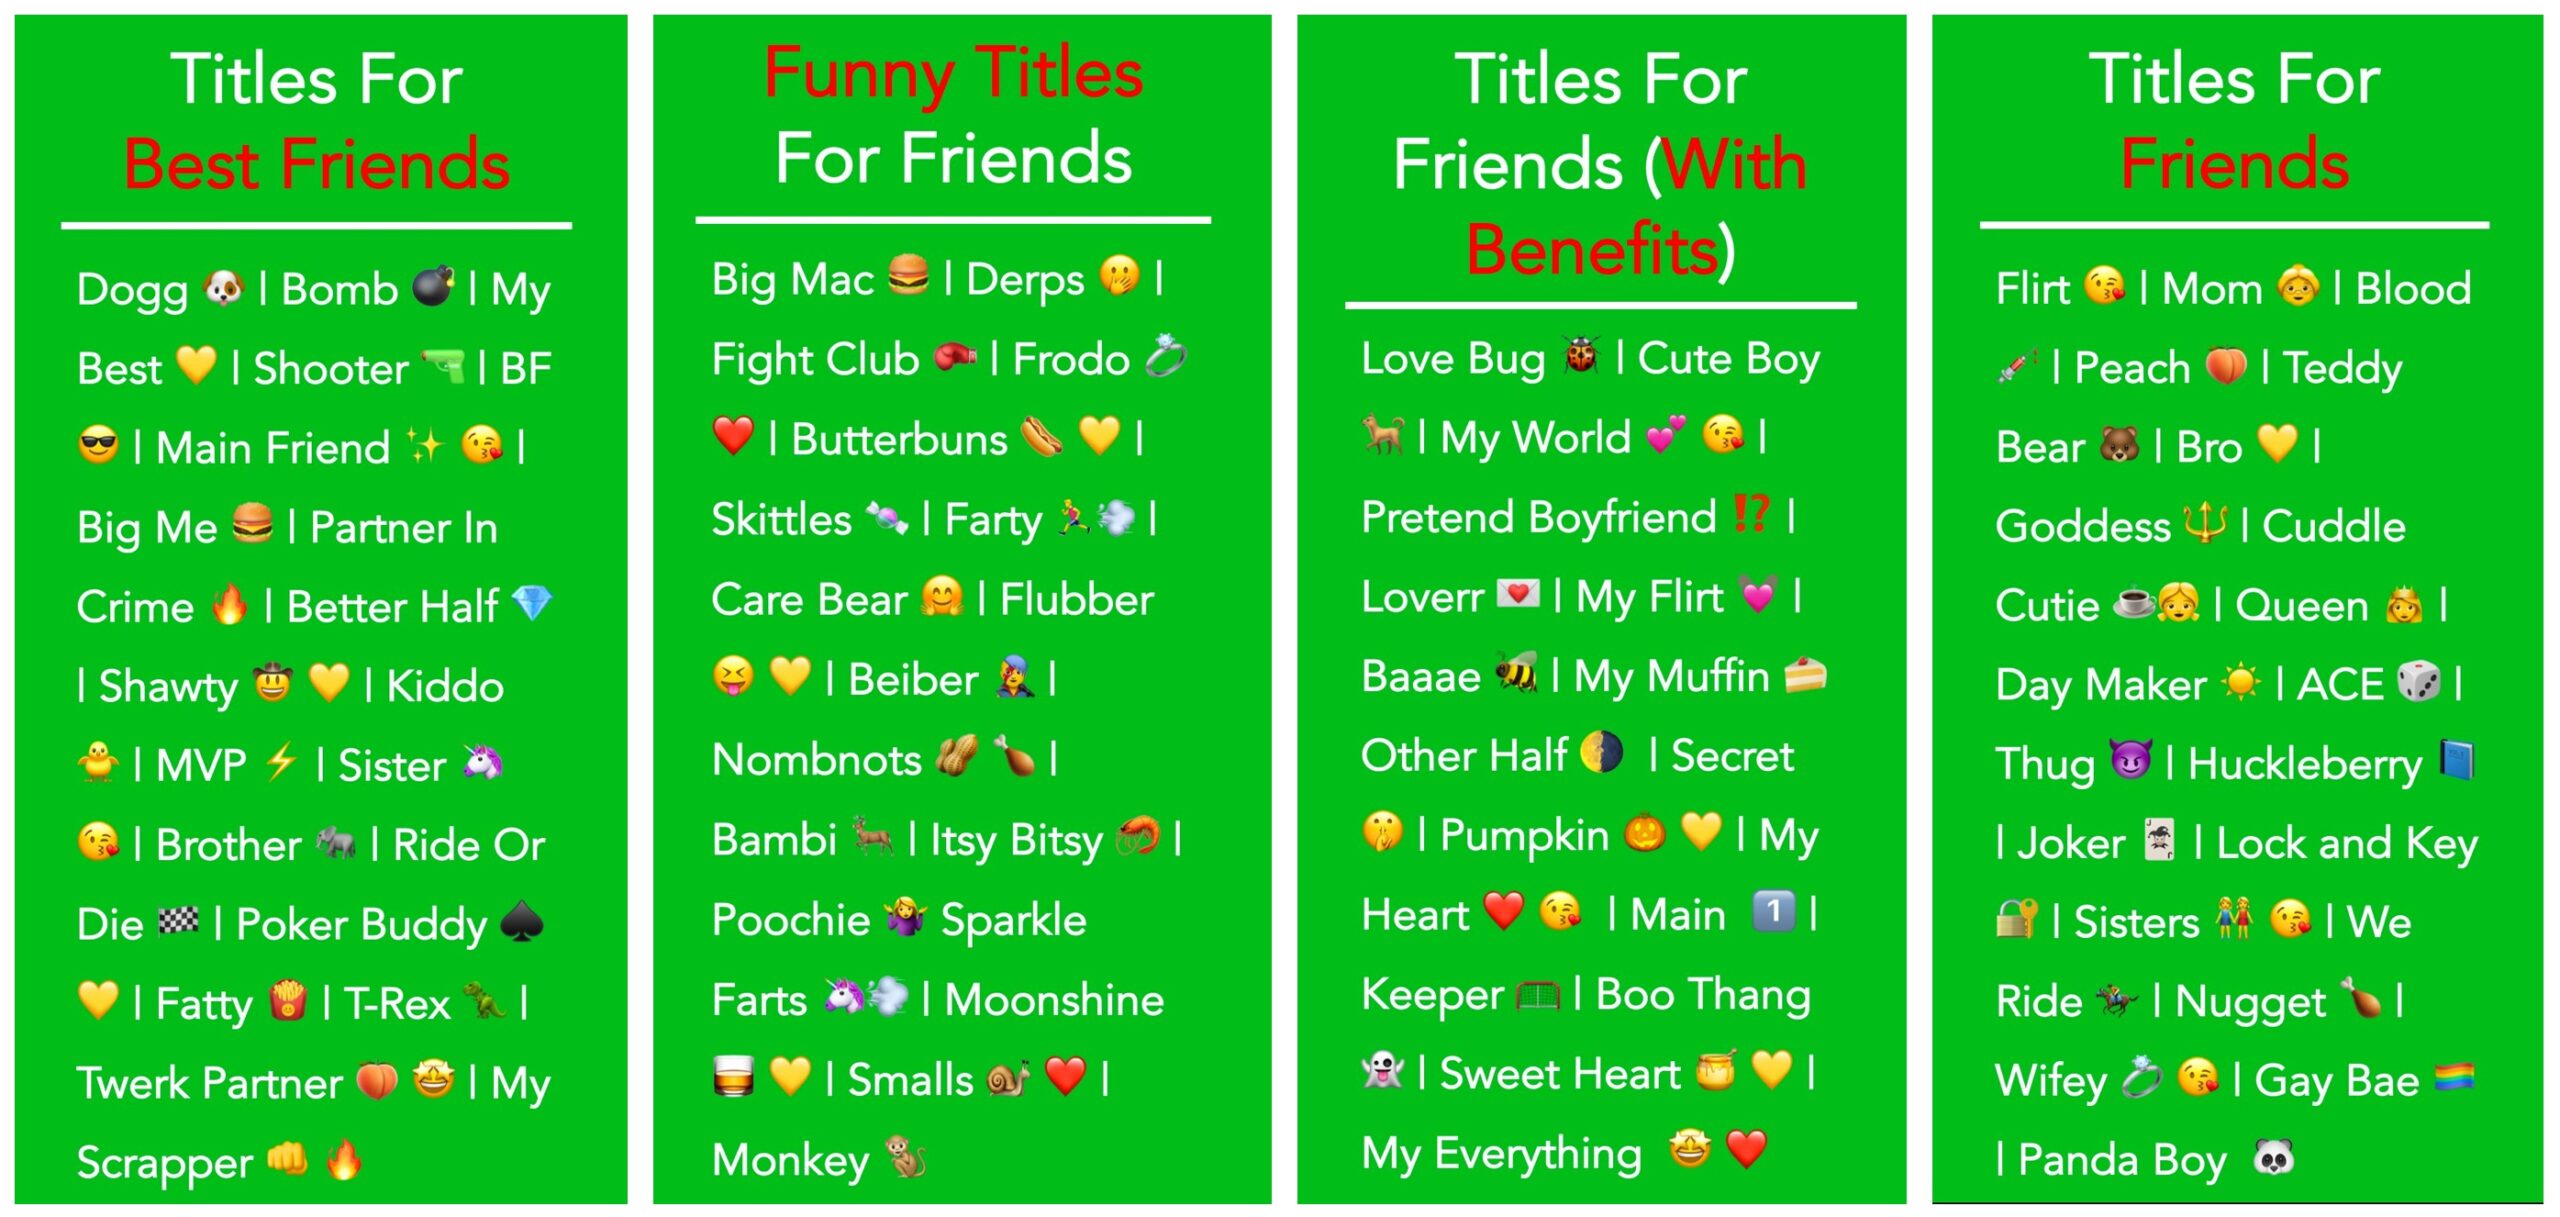 Titles For Friends Fun Cute Nicknames How To Apps